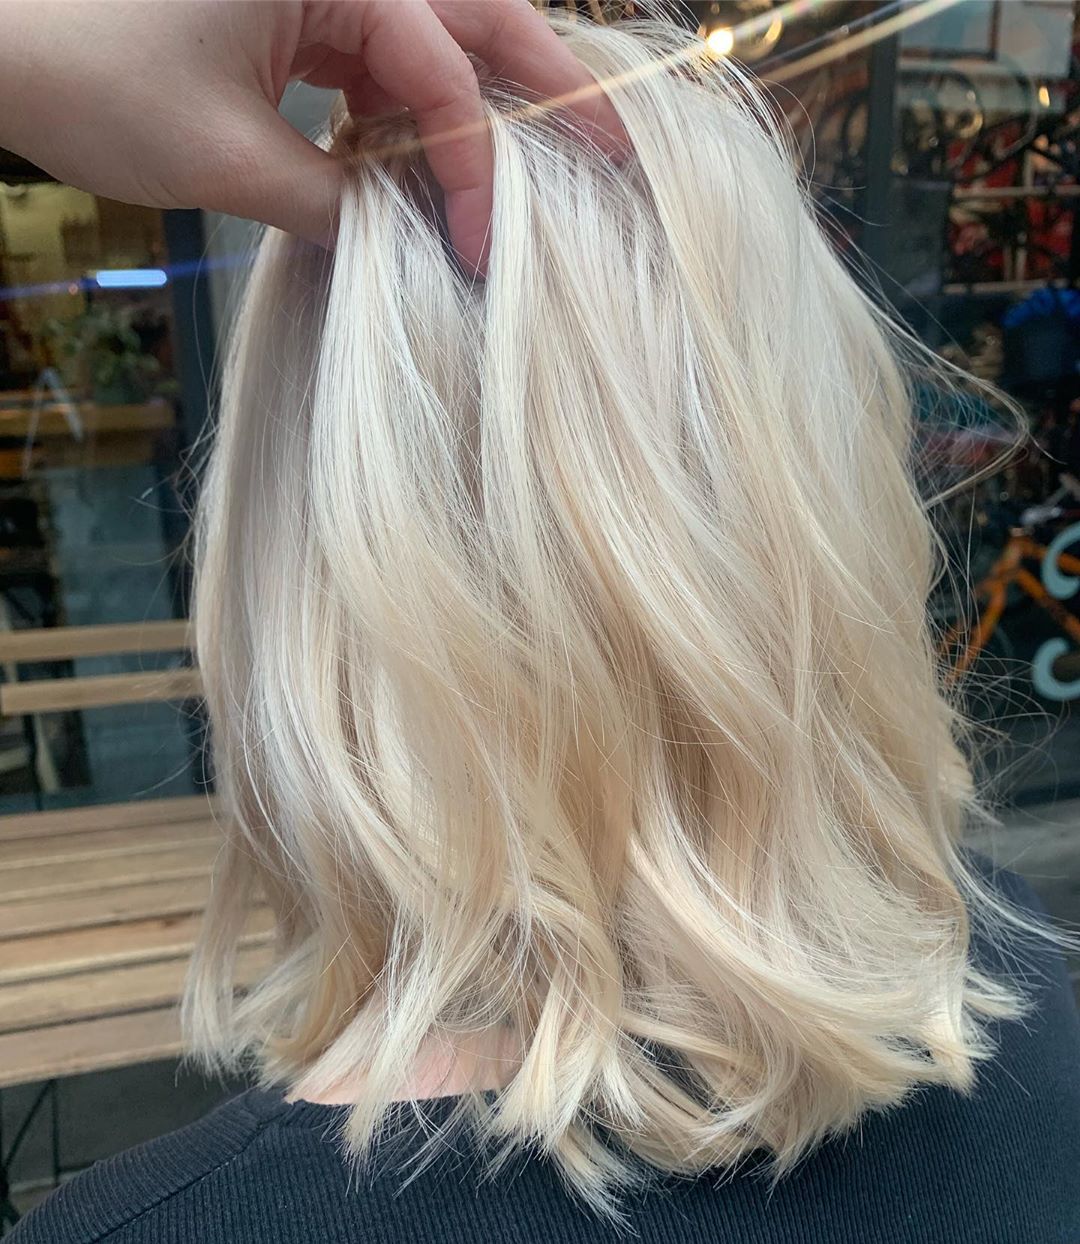 35 Short Blonde Hairstyles And New Trends In 2020